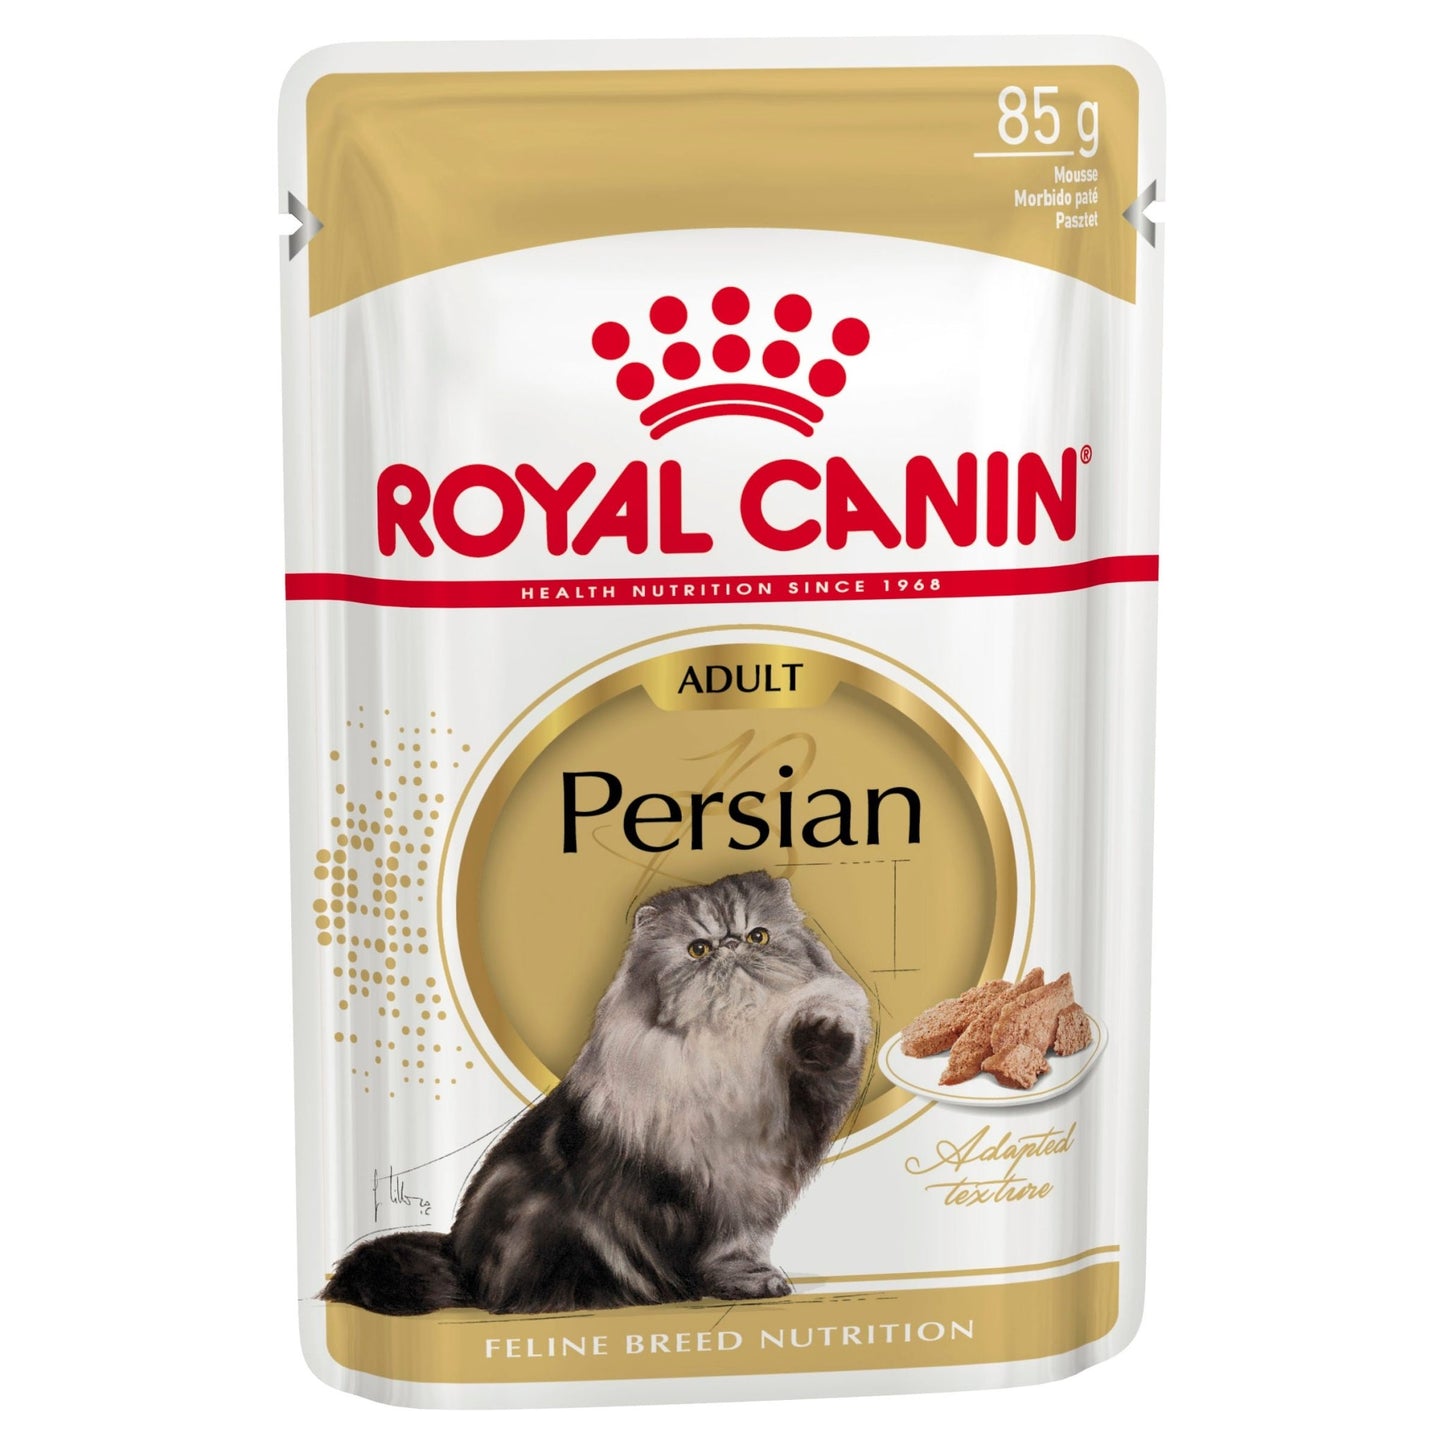 Royal Canin Cat Wet Food Pouches Persian 12x85g - Woonona Petfood & Produce